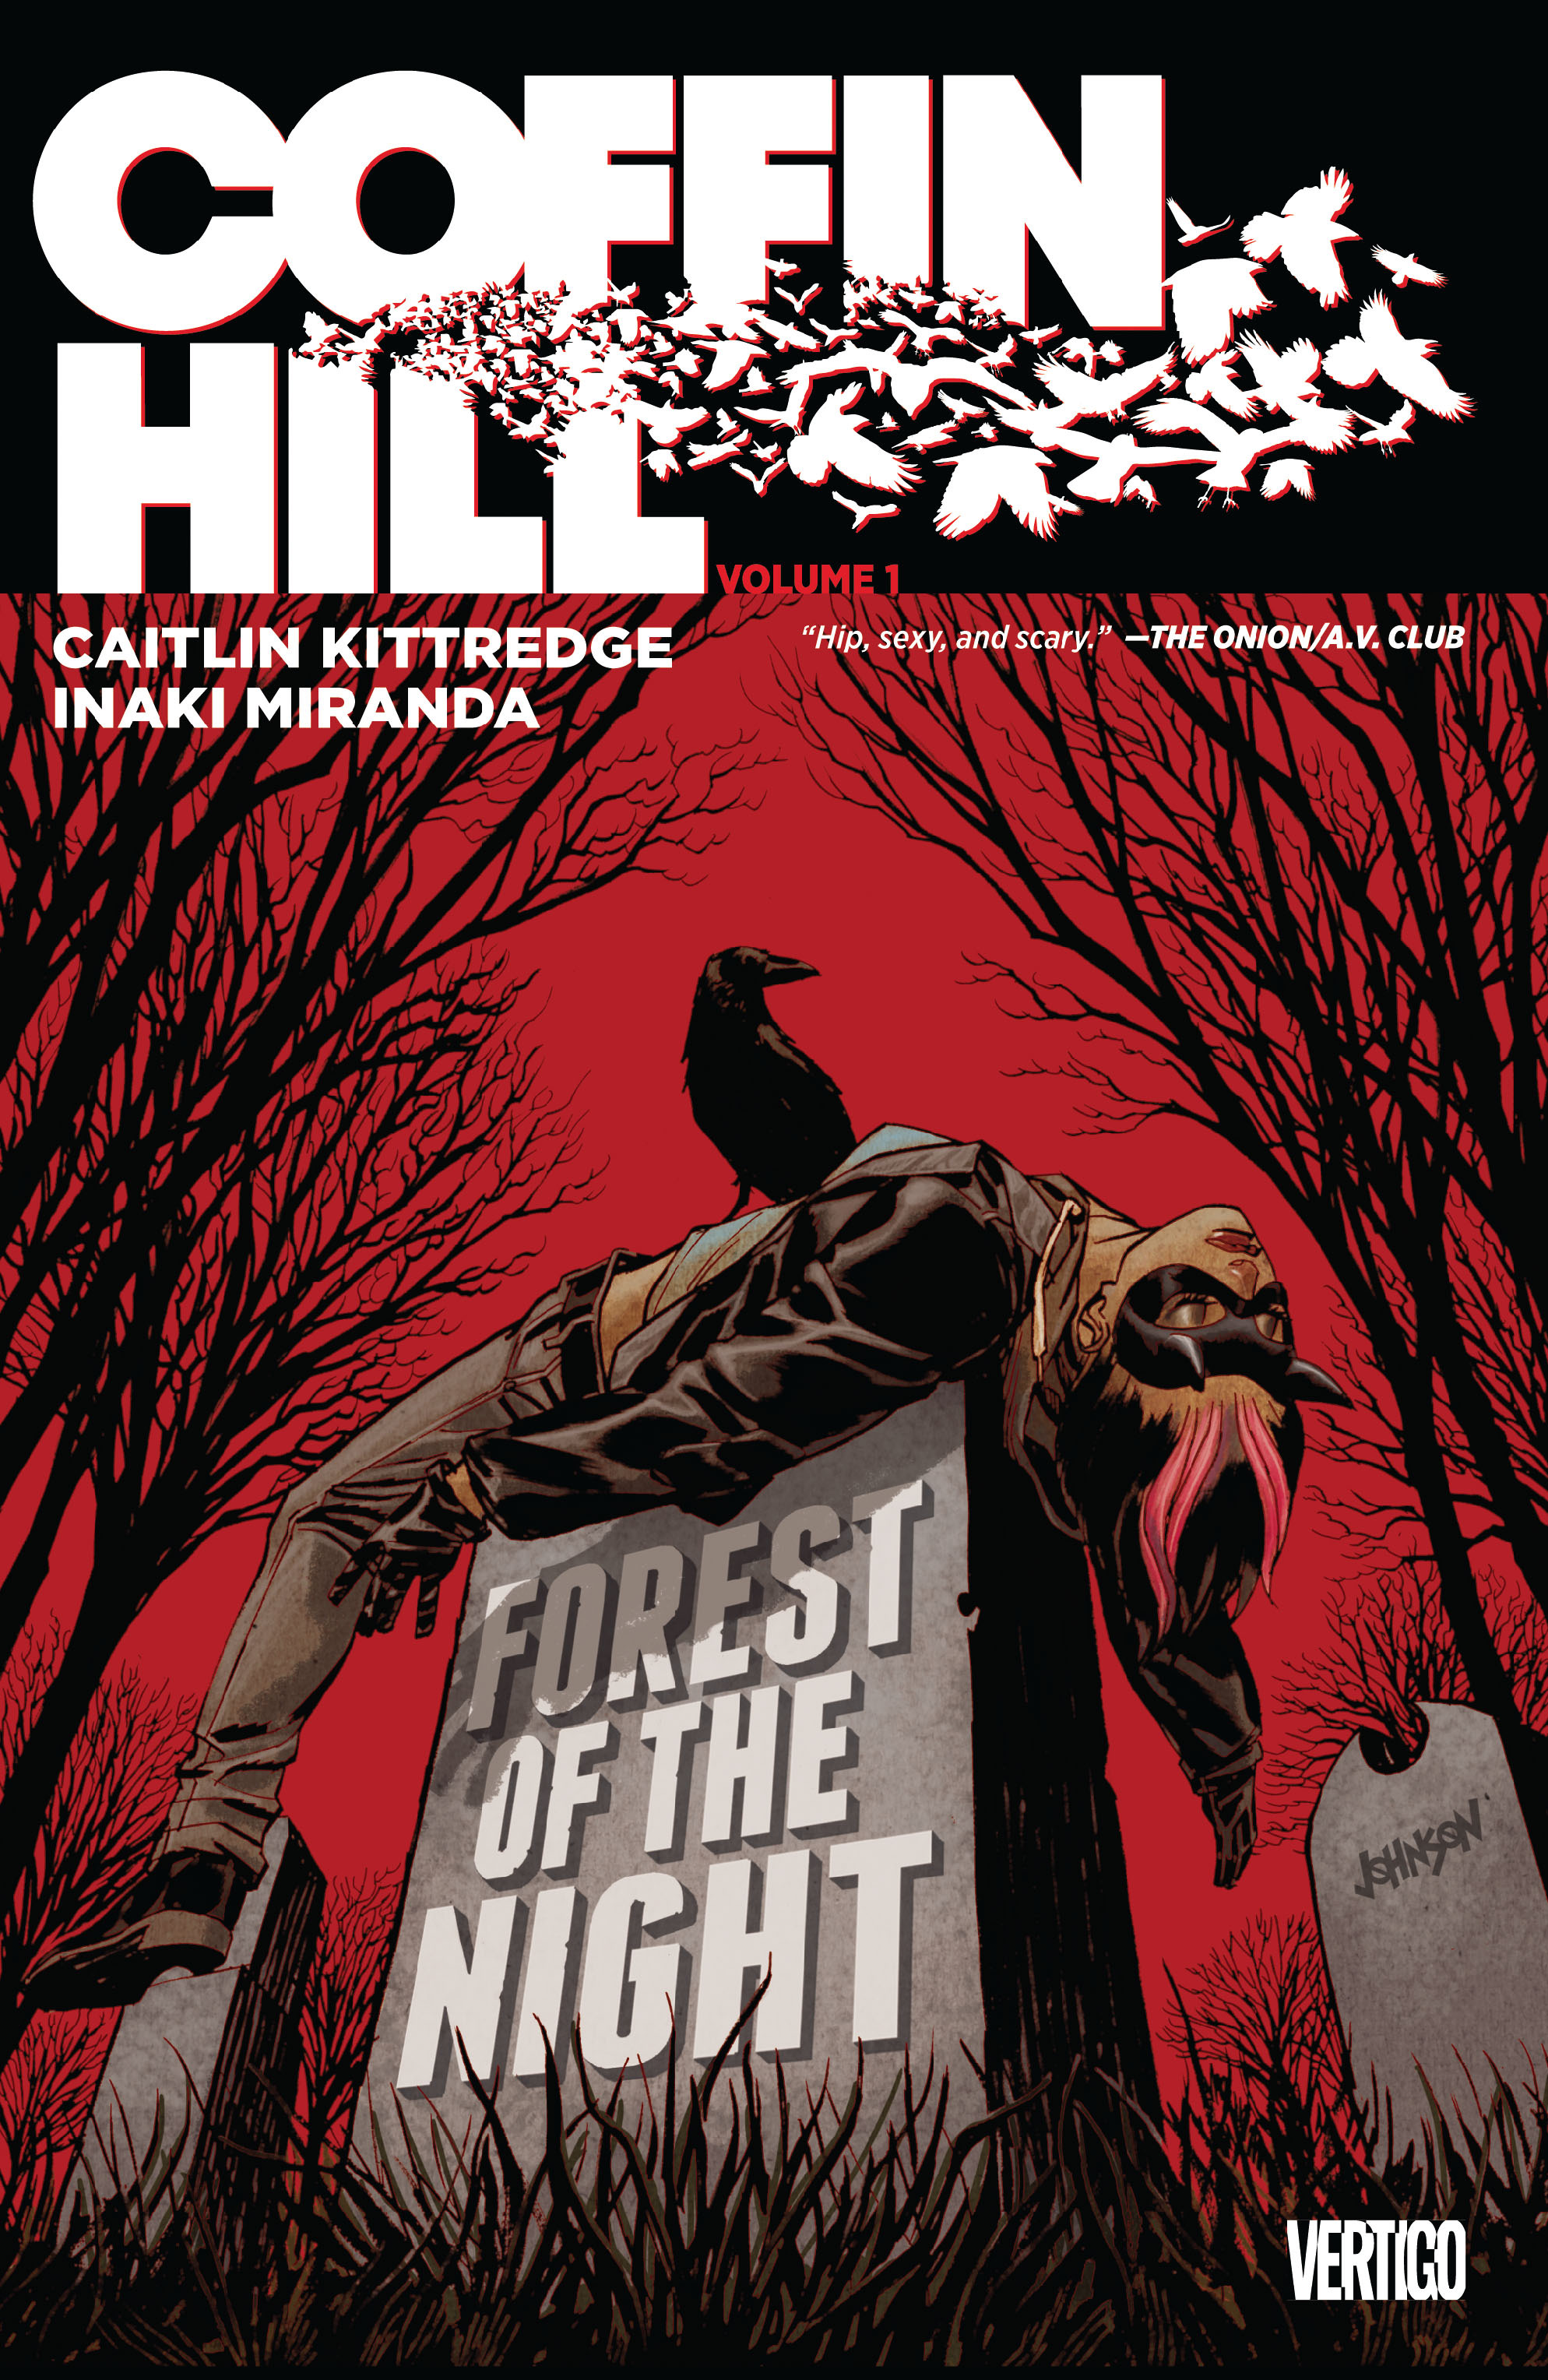 Read online Coffin Hill comic -  Issue # TPB - 1